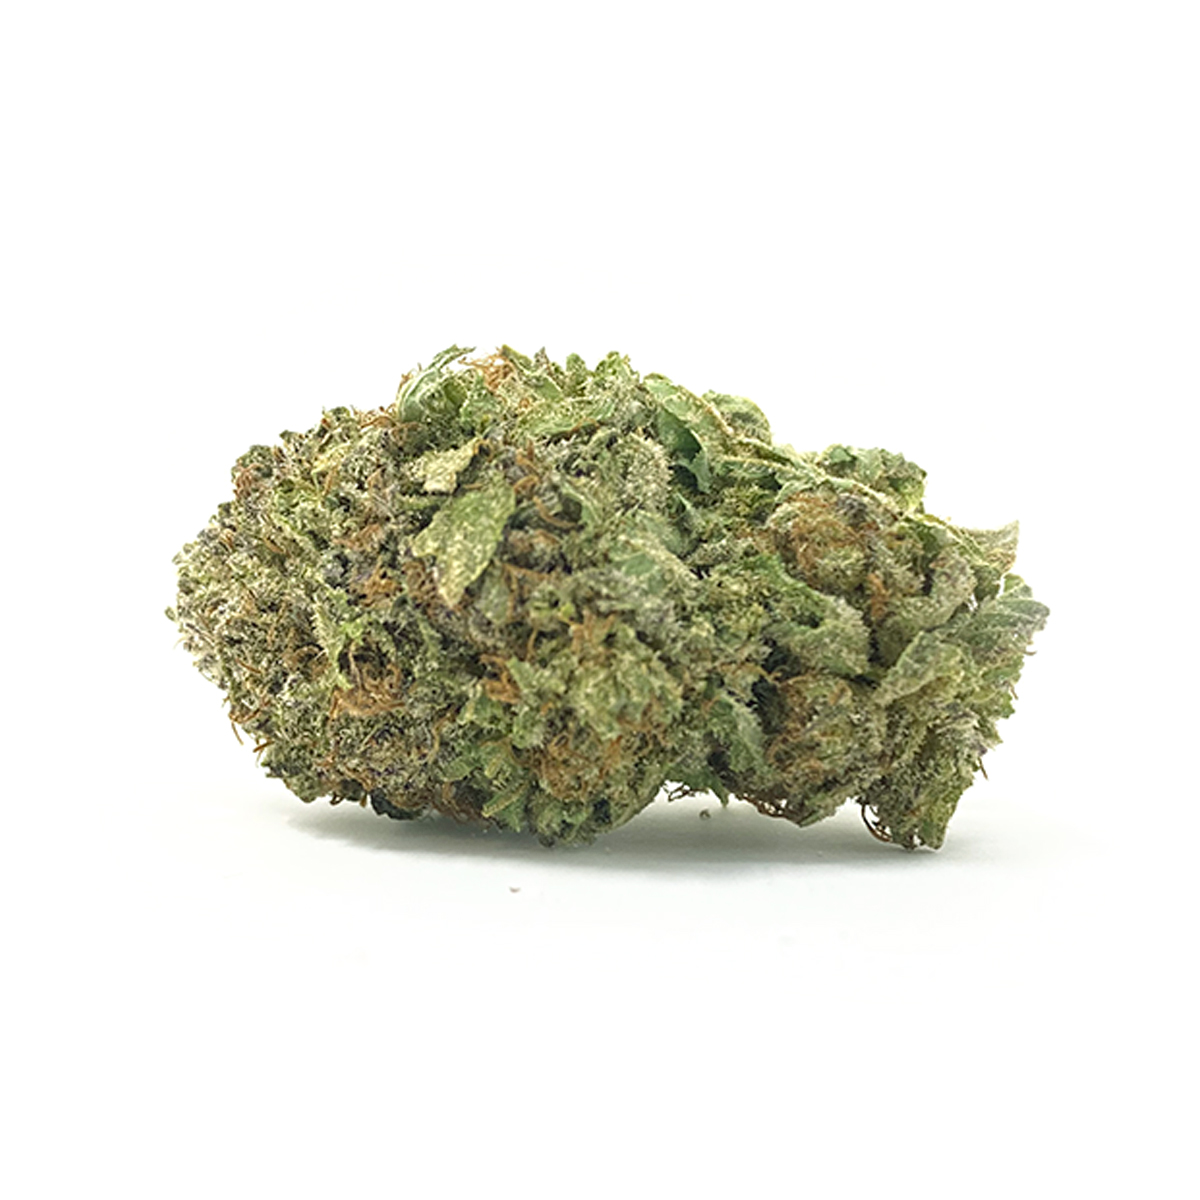 Budget Buds Bubba Kush | Buy Weed Online | Dispensary Near Me